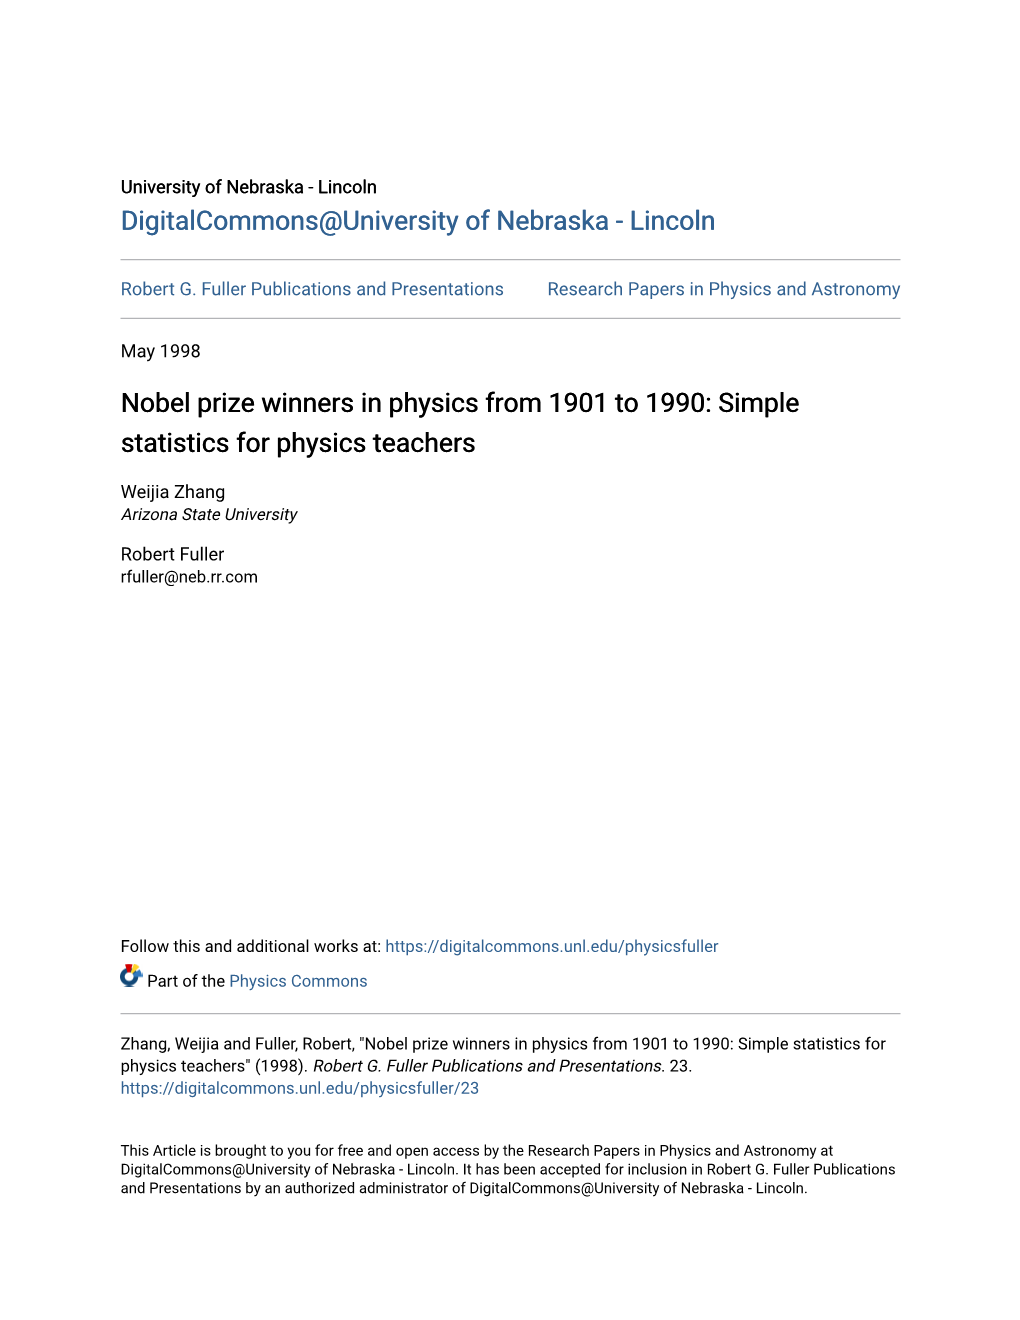 Nobel Prize Winners in Physics from 1901 to 1990: Simple Statistics for Physics Teachers